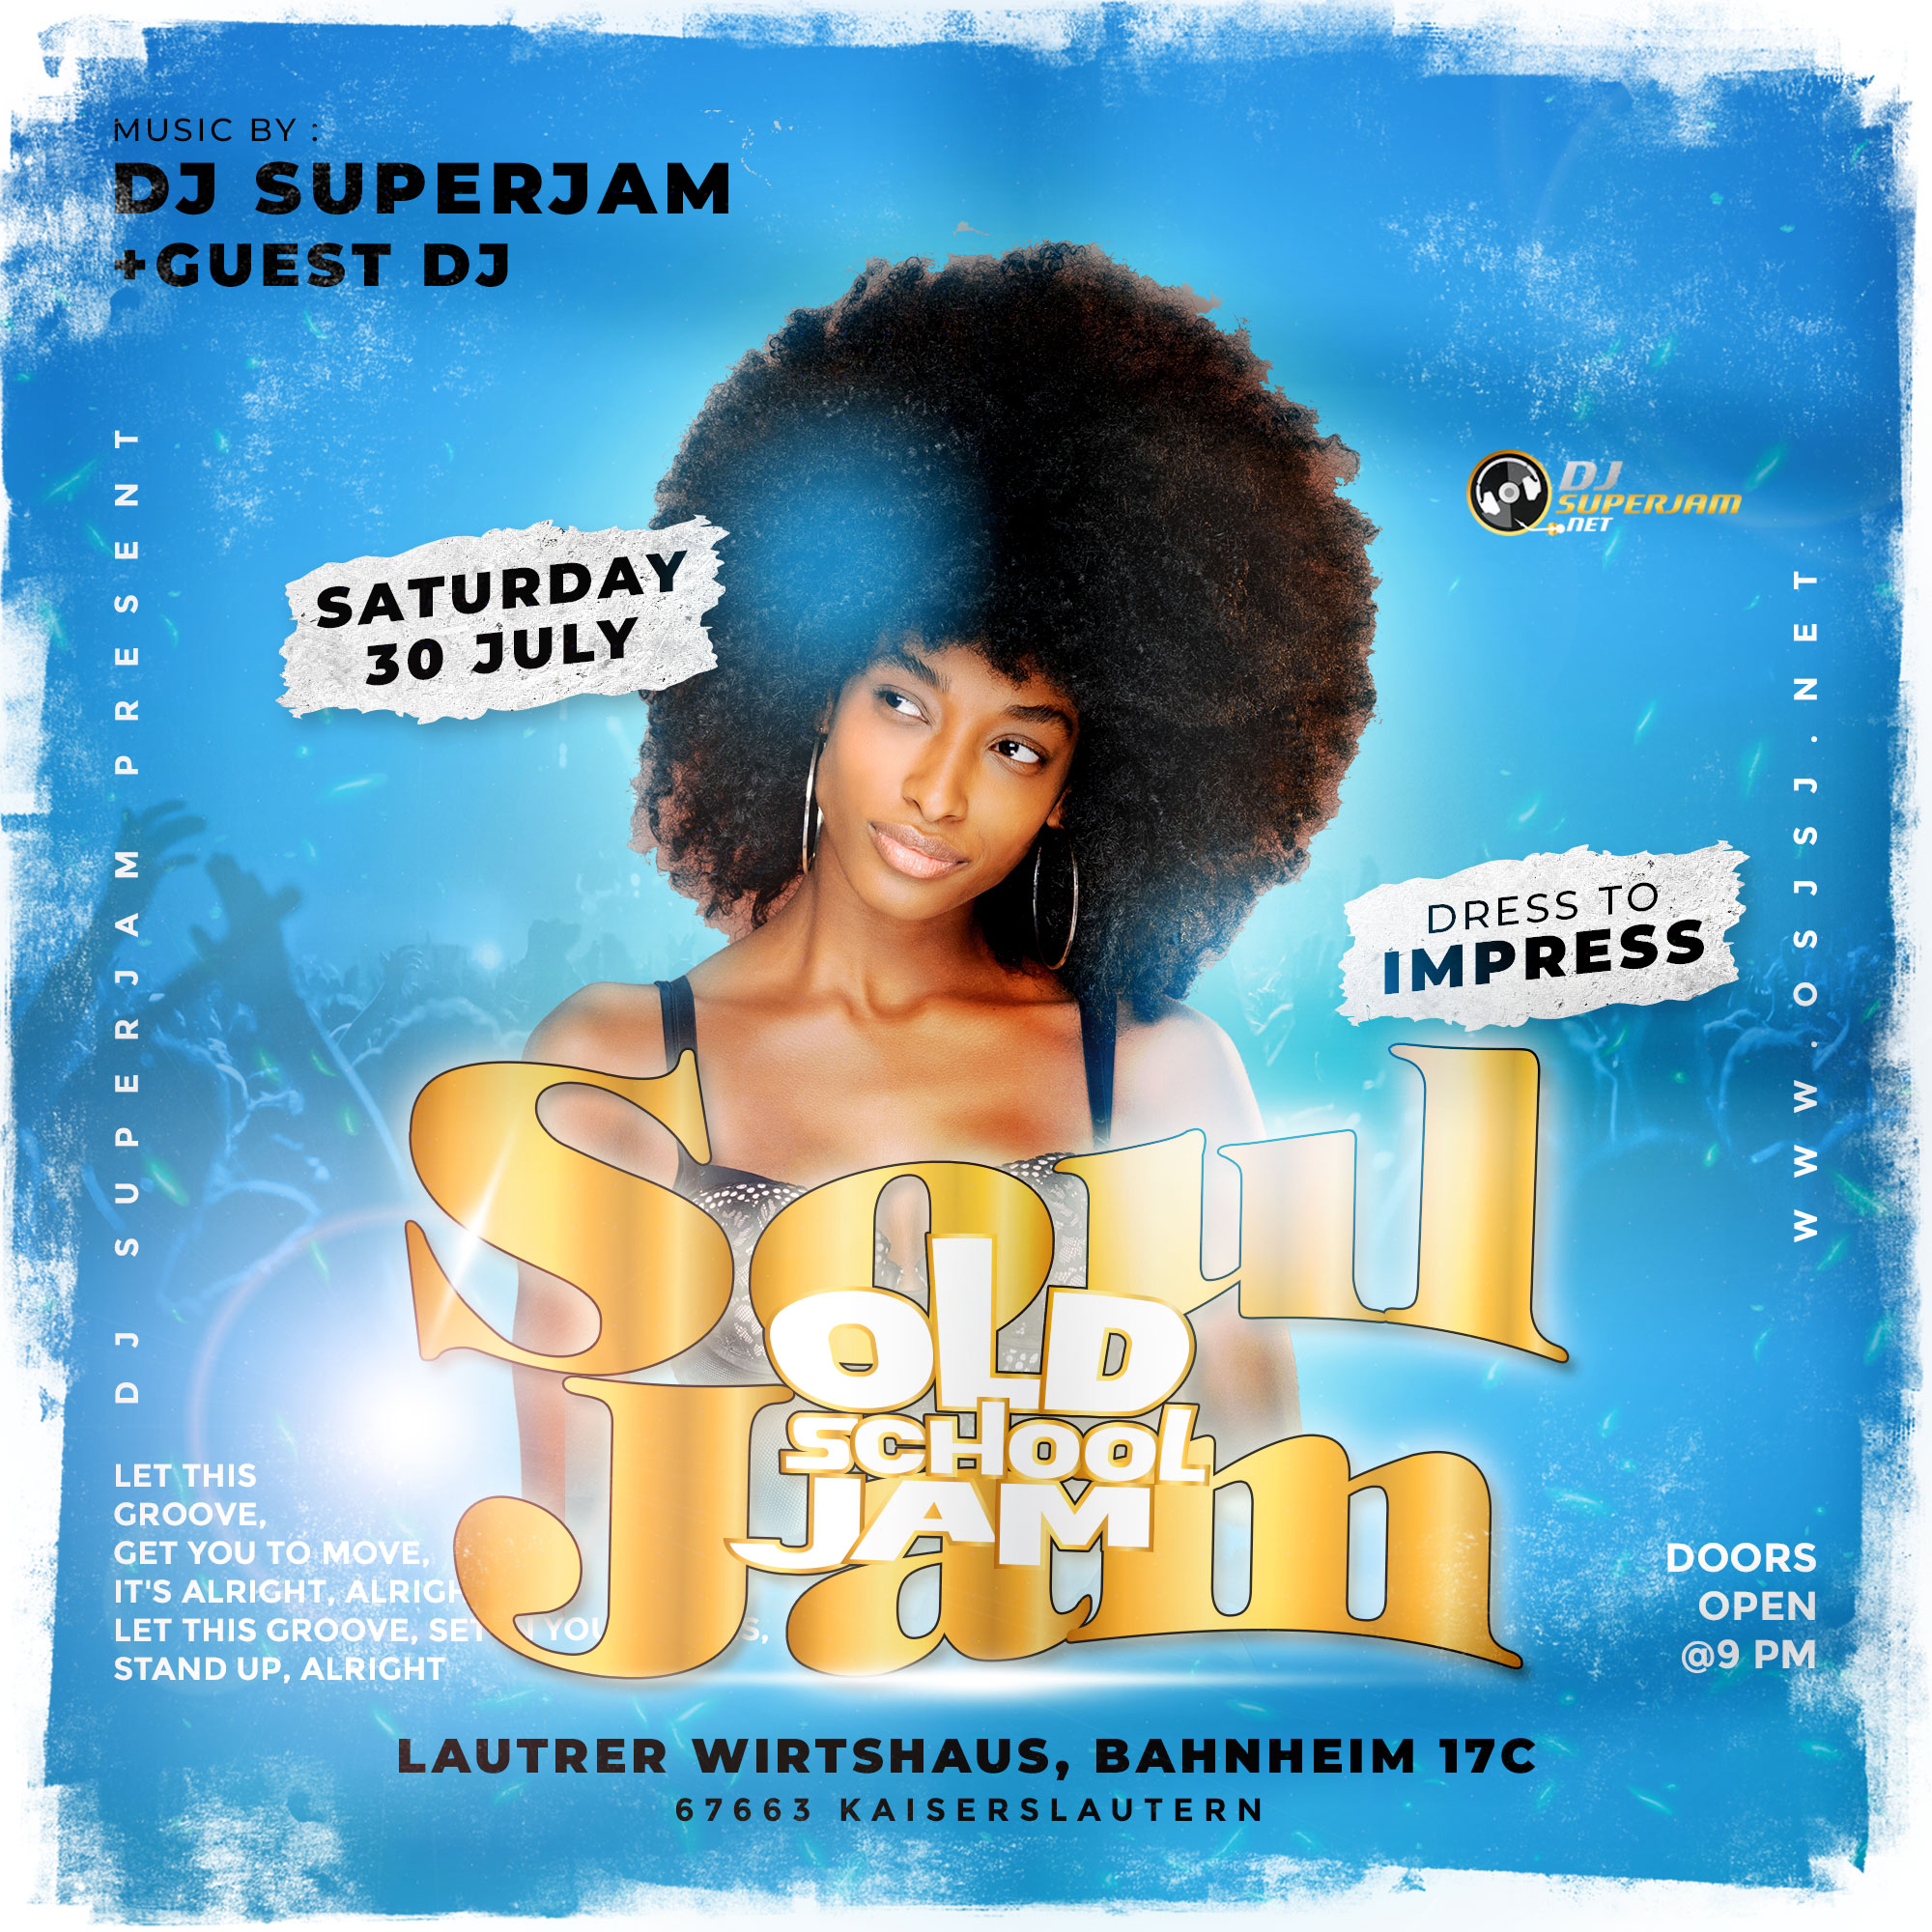 SOUL JAM in the Lautrer Wirtshaus July 30, 2022